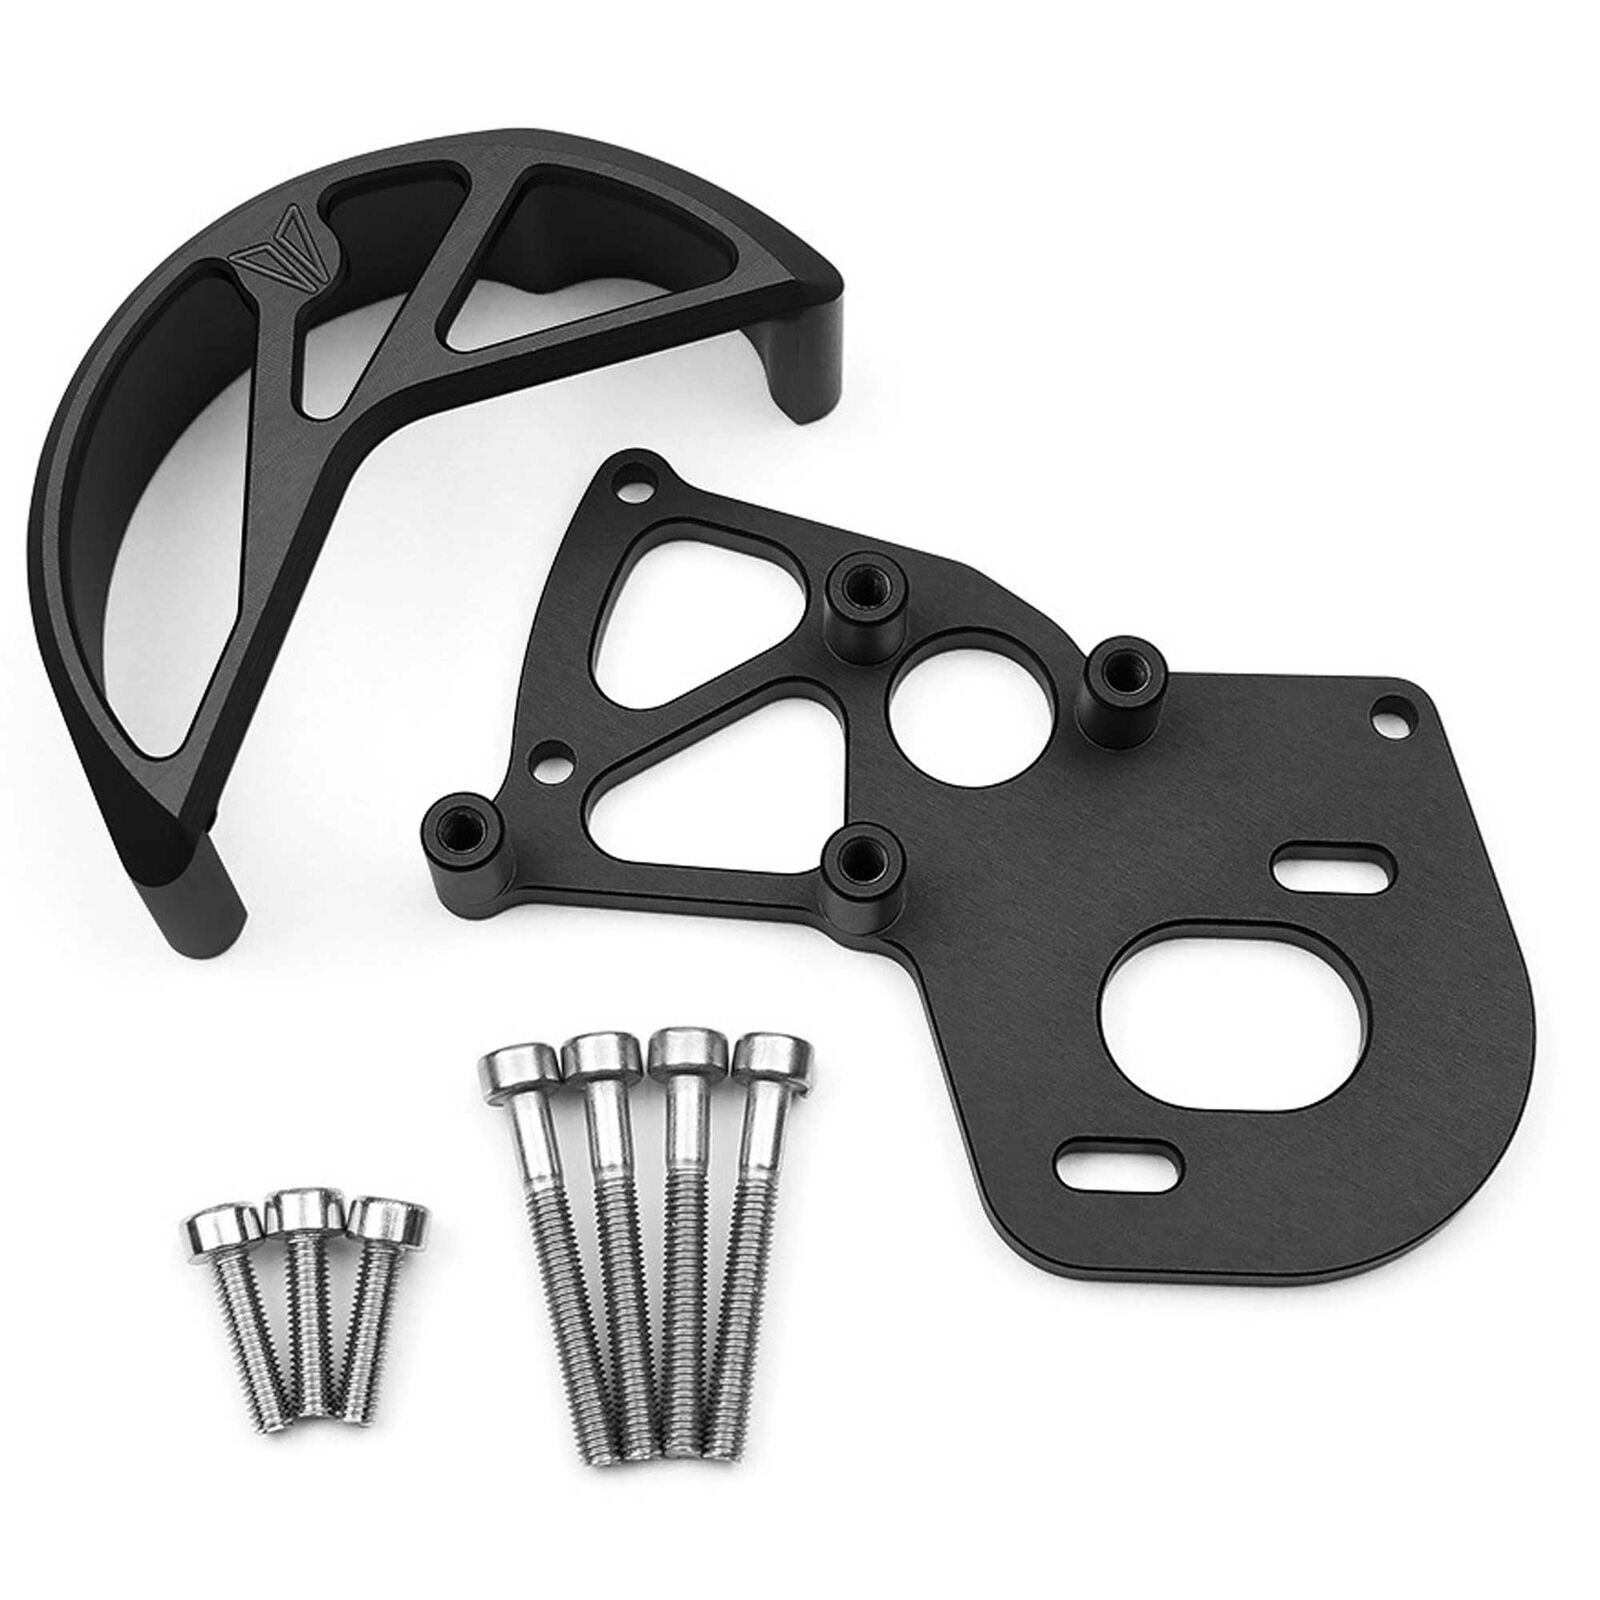 Black Motor Plate and Gear Guard: VS4-10 Chassis